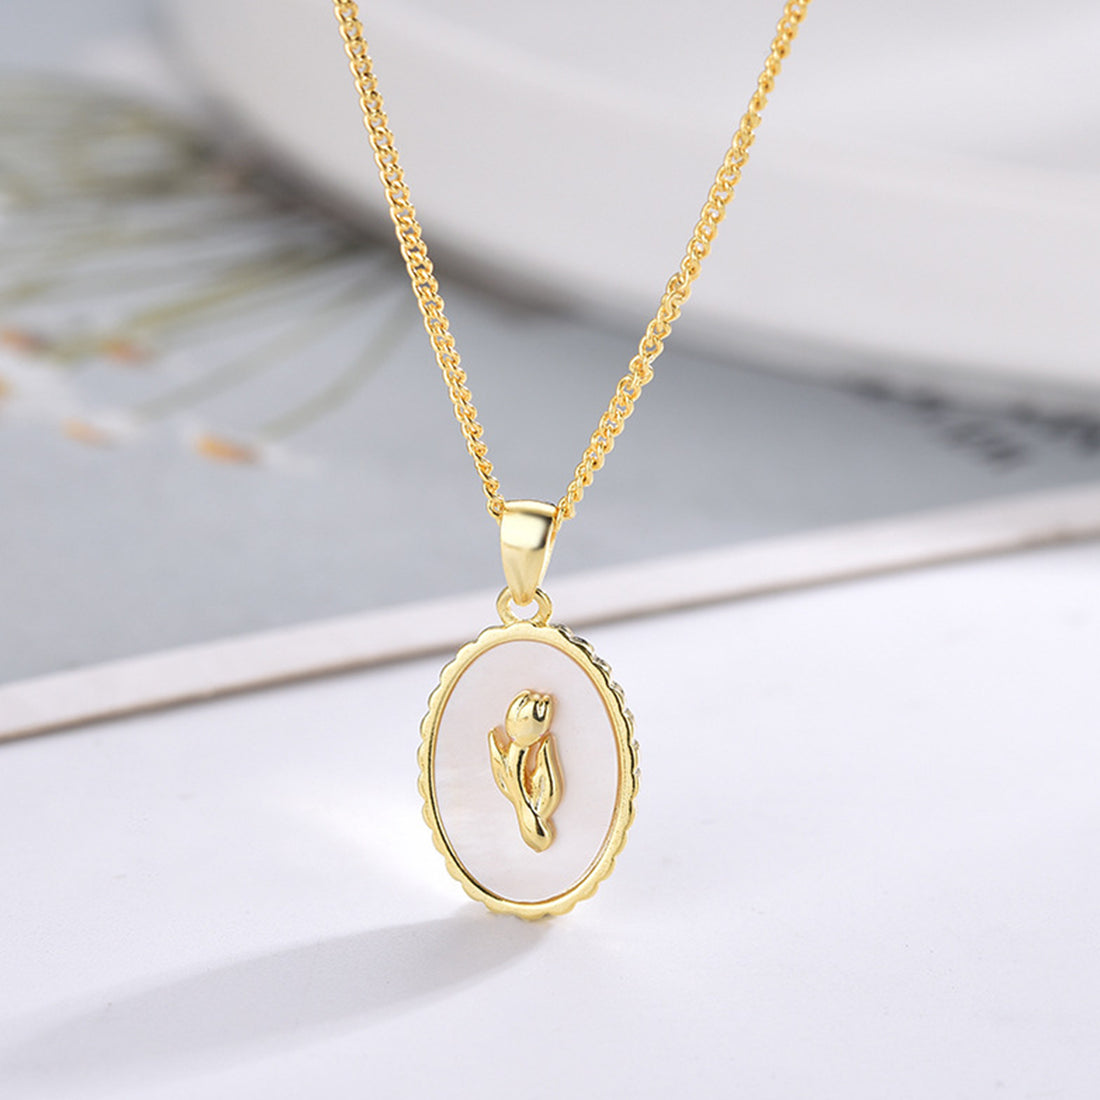 Luxurious Oval Seashell Necklace